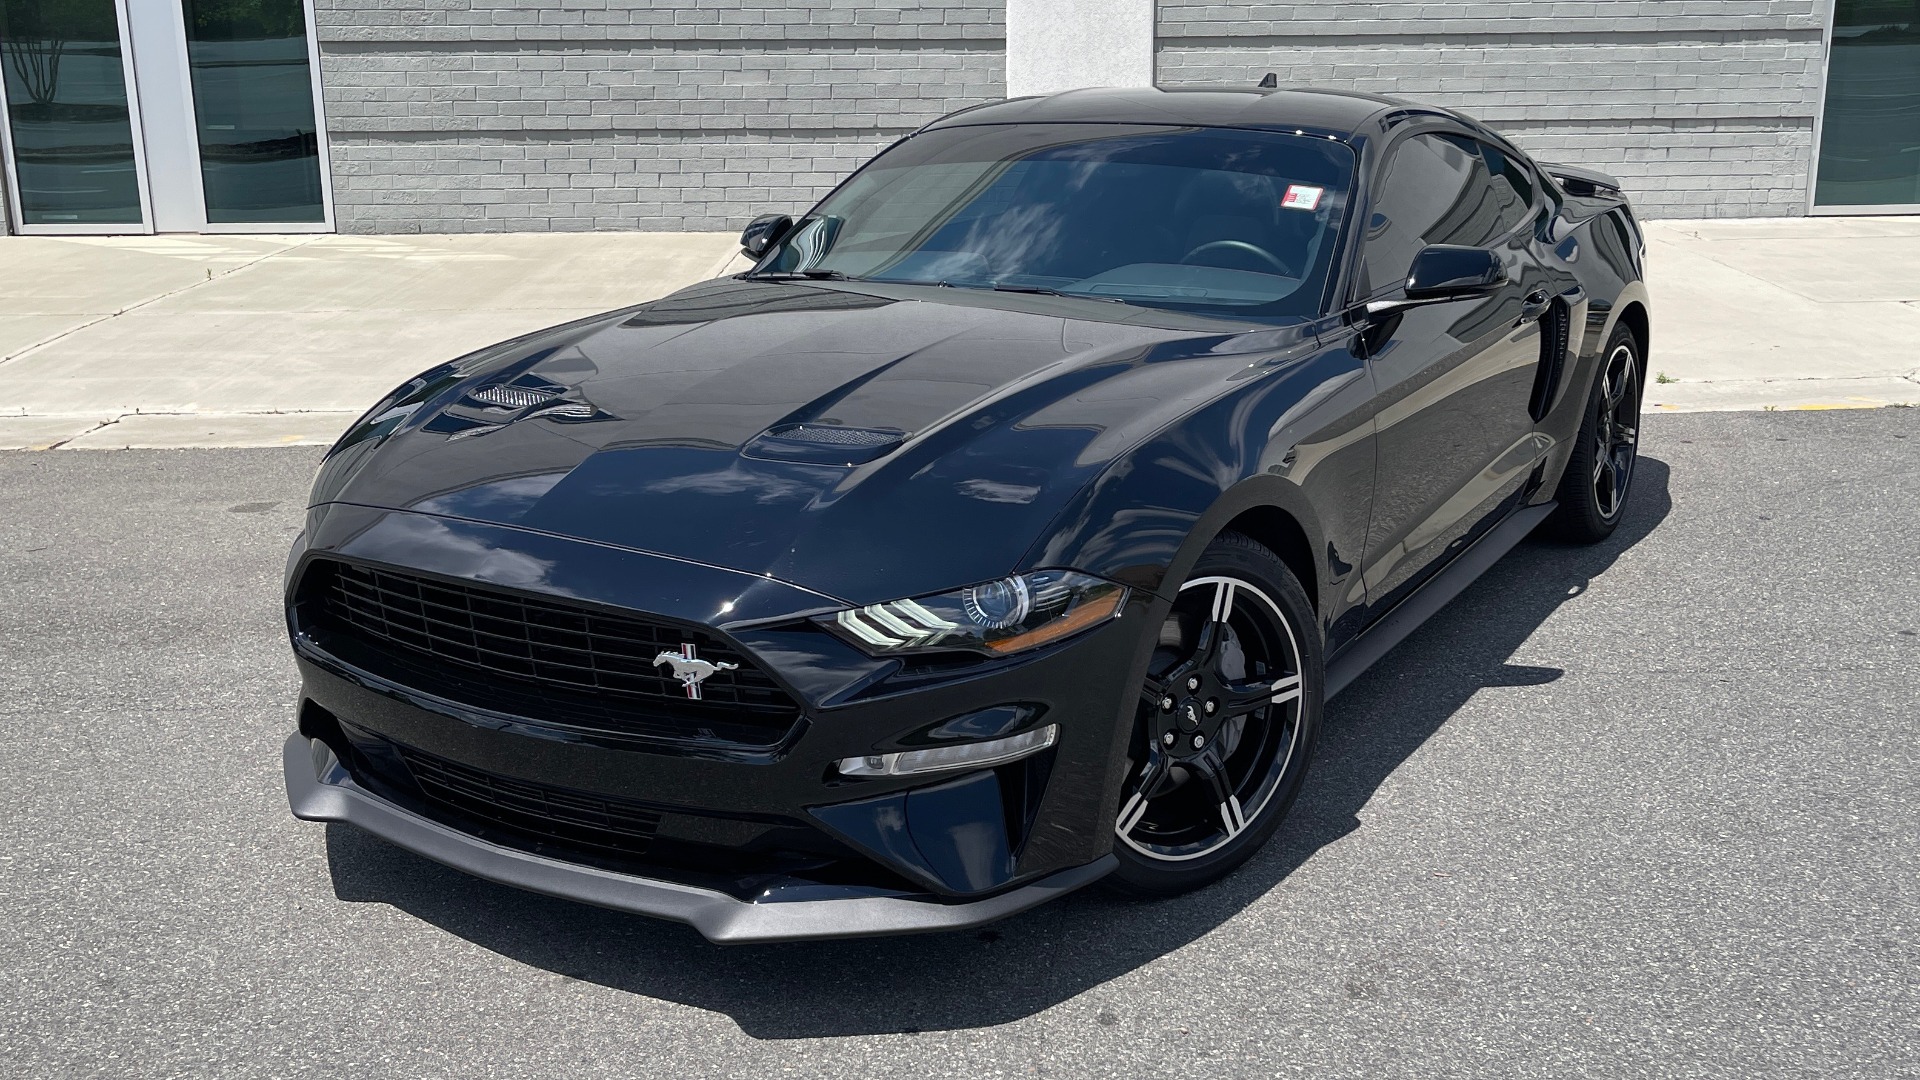 Used 2020 Ford MUSTANG GT PREMIUM / CALIFORNIA SPECIAL / 5.0L V8 / 6-SPD MAN for sale Sold at Formula Imports in Charlotte NC 28227 4